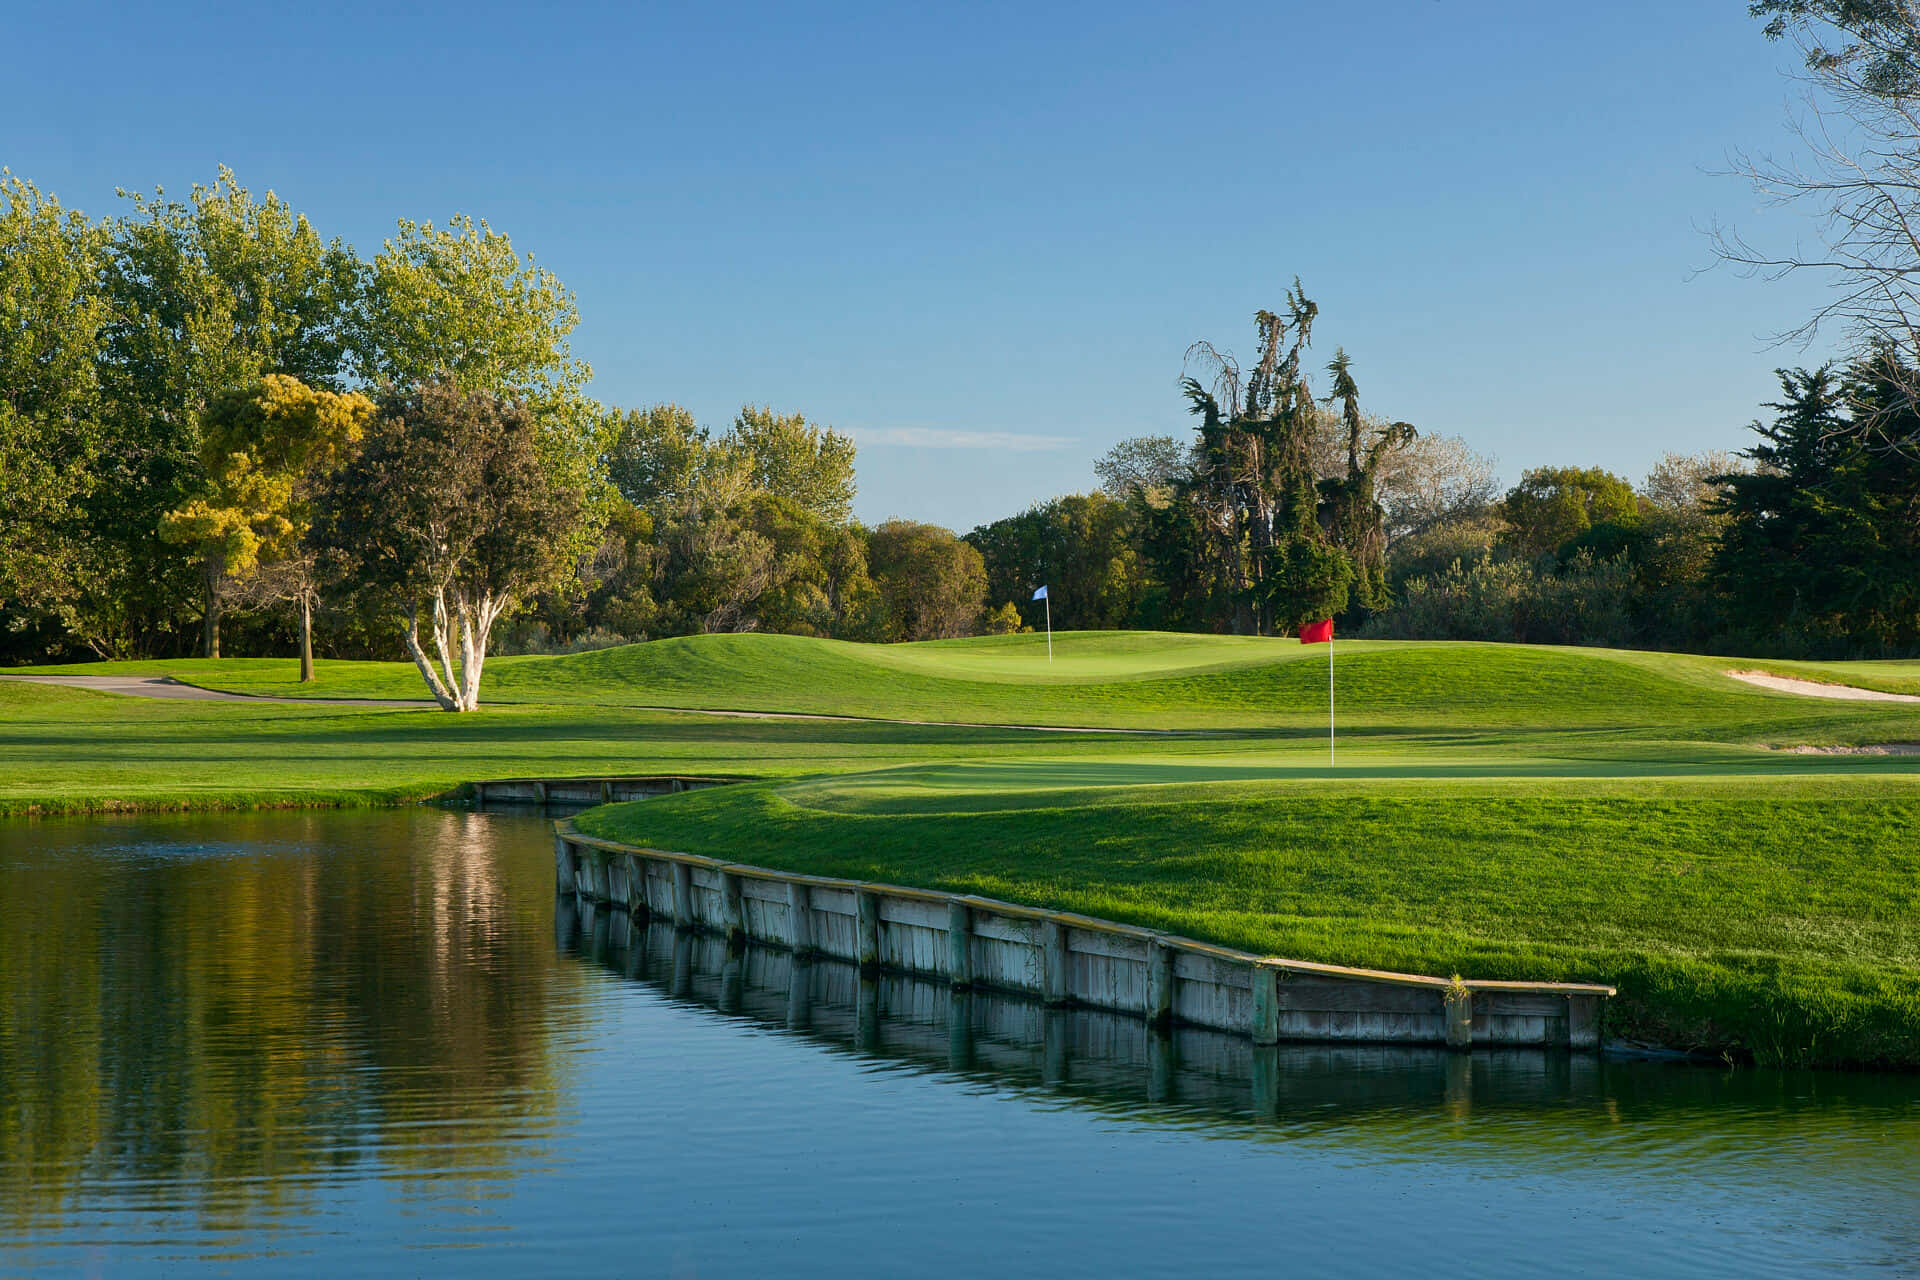 Enjoy the beautiful view of this 18-hole golf course.